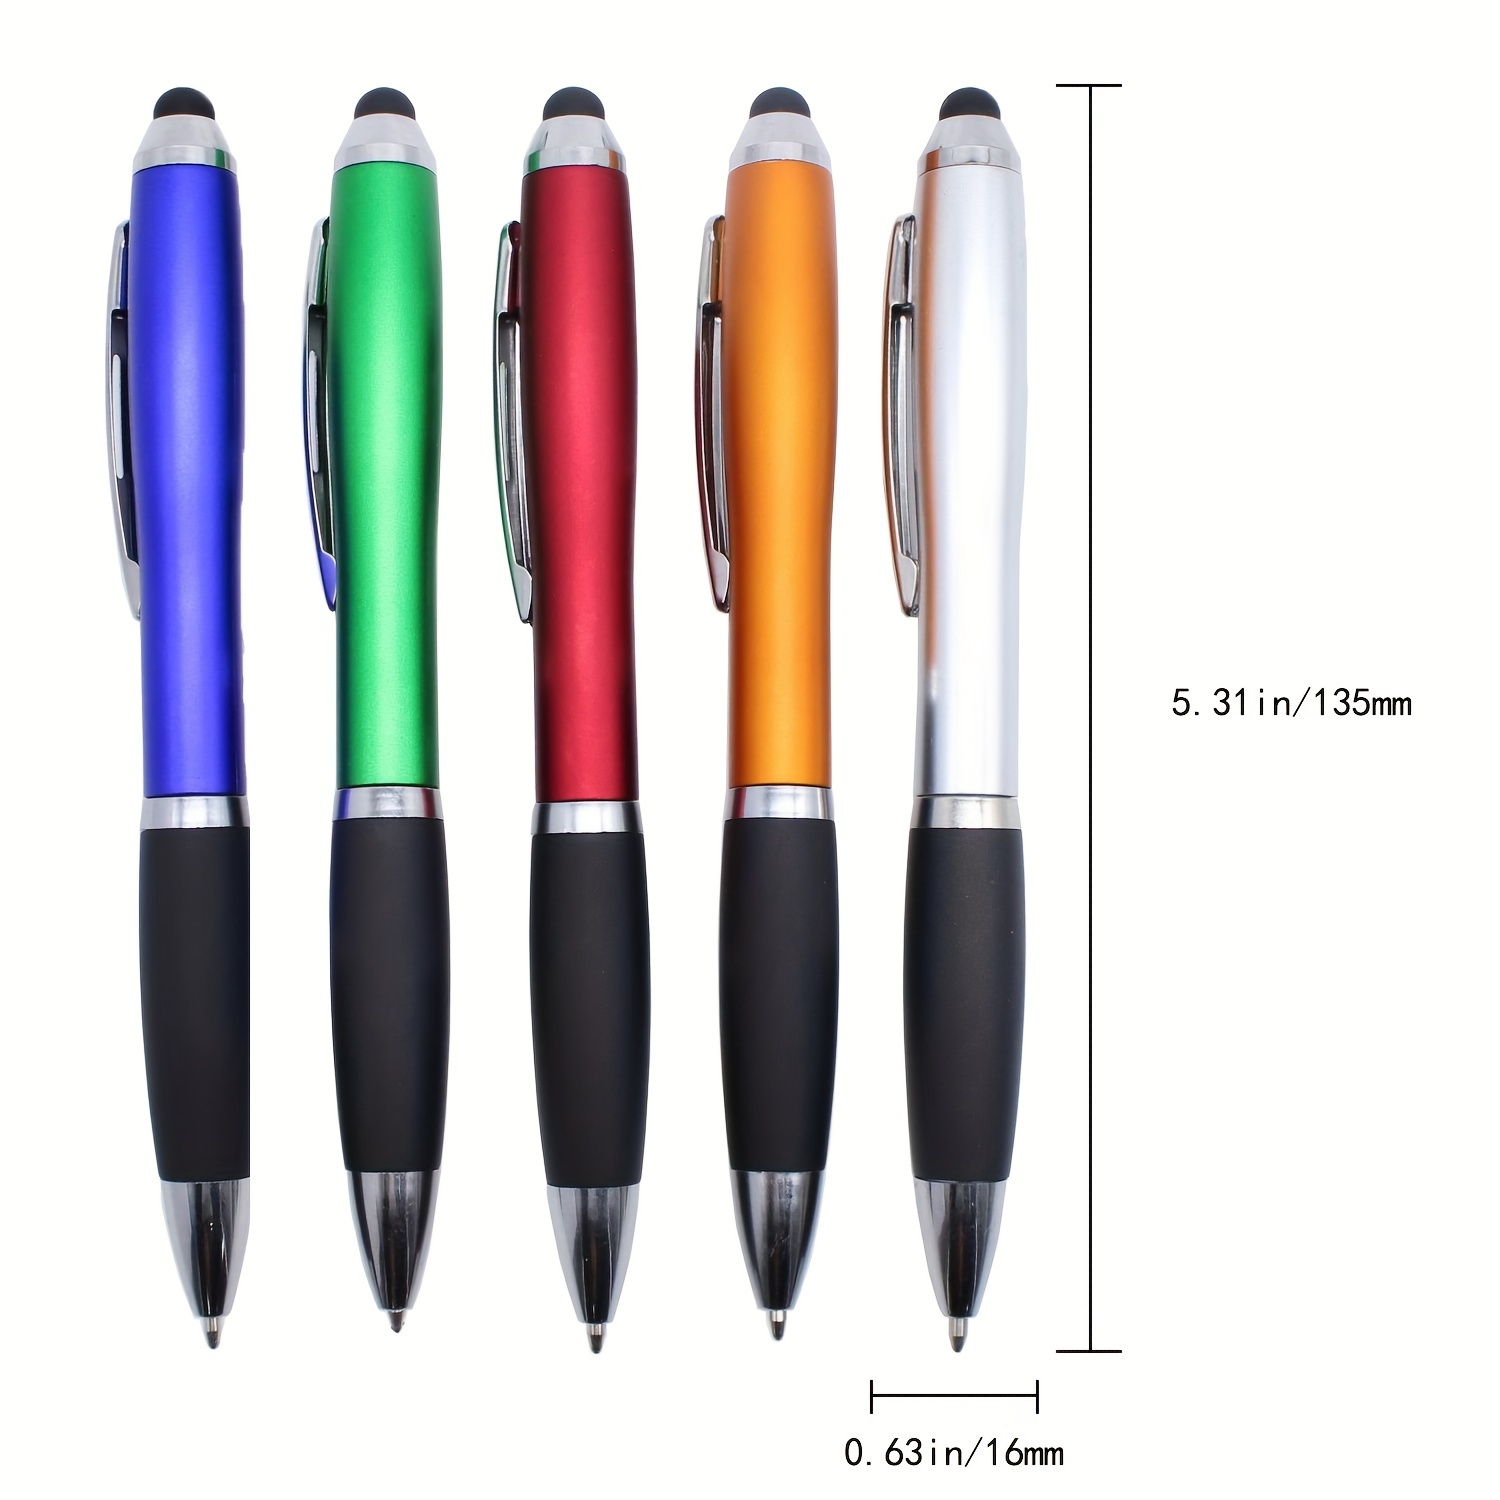 Stylus Pens for Touch Screens, Medium Point Pens with Crystals for